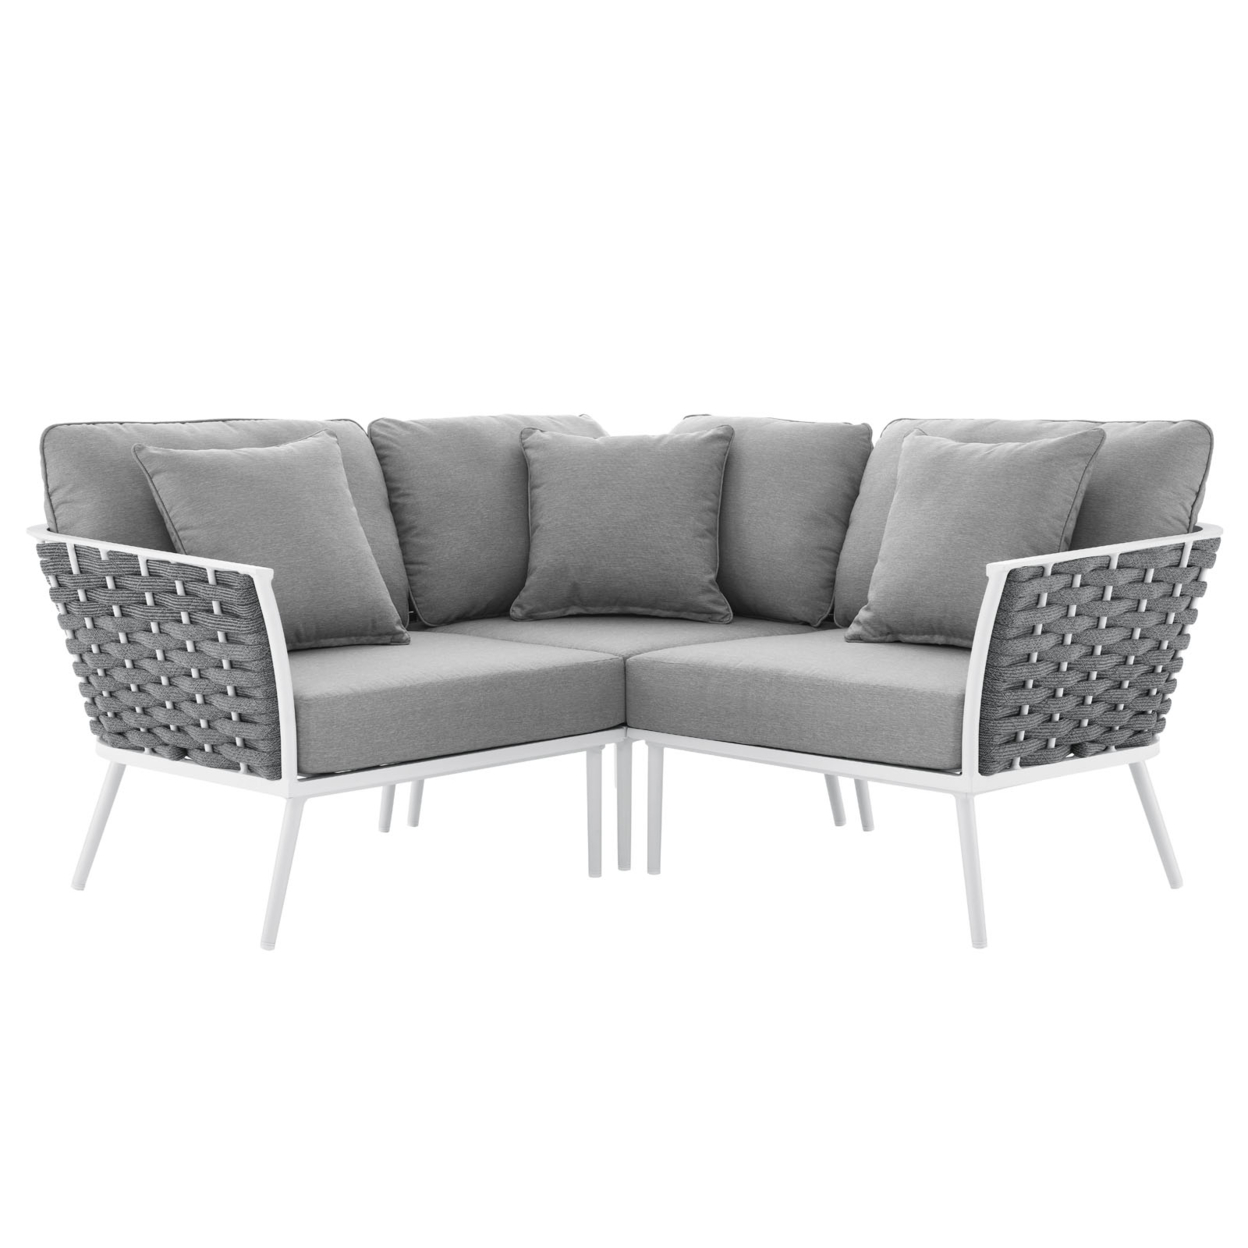 Stance Outdoor Patio Aluminum Small Sectional Sofa, White Gray